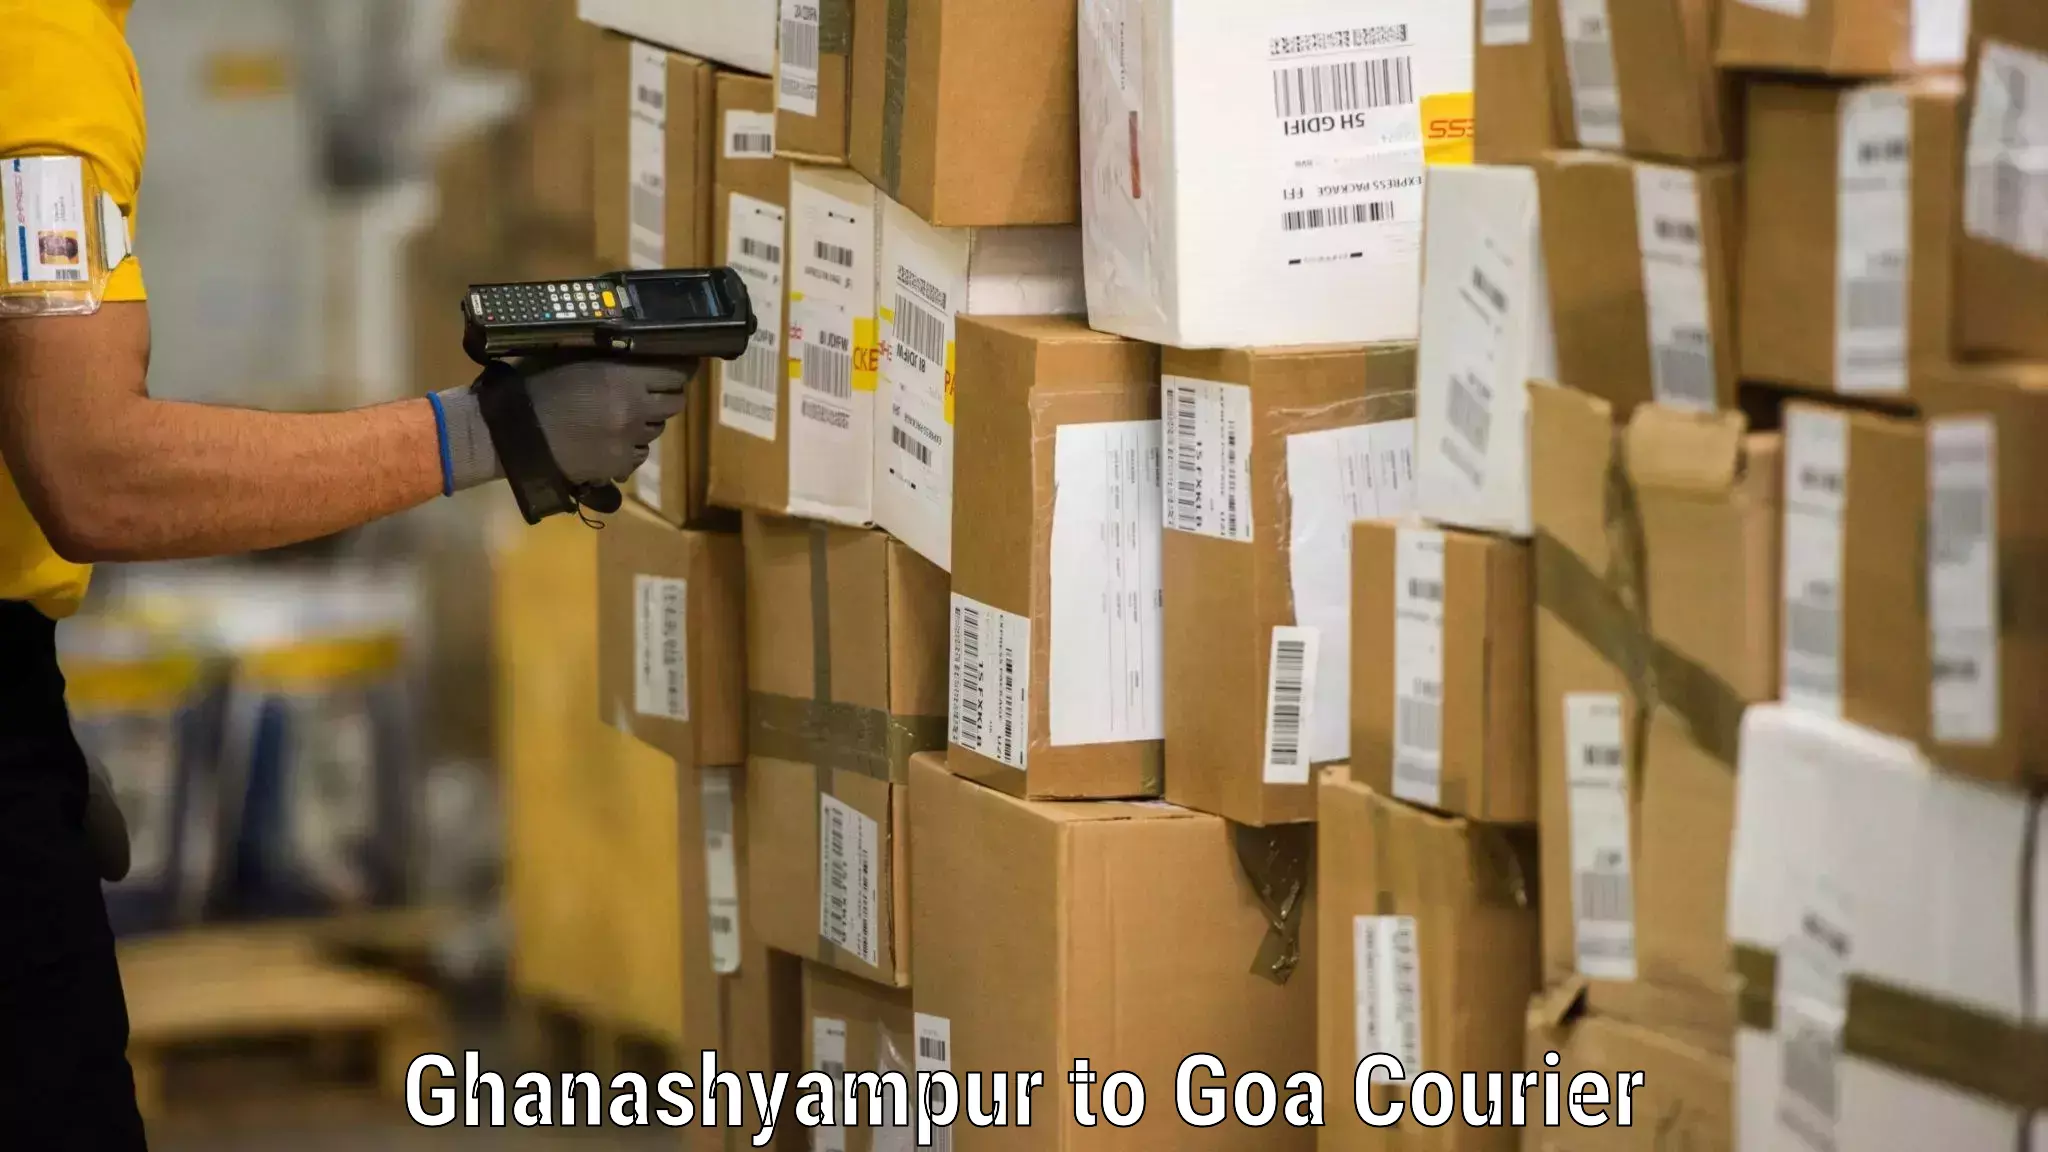 Moving service excellence Ghanashyampur to Goa